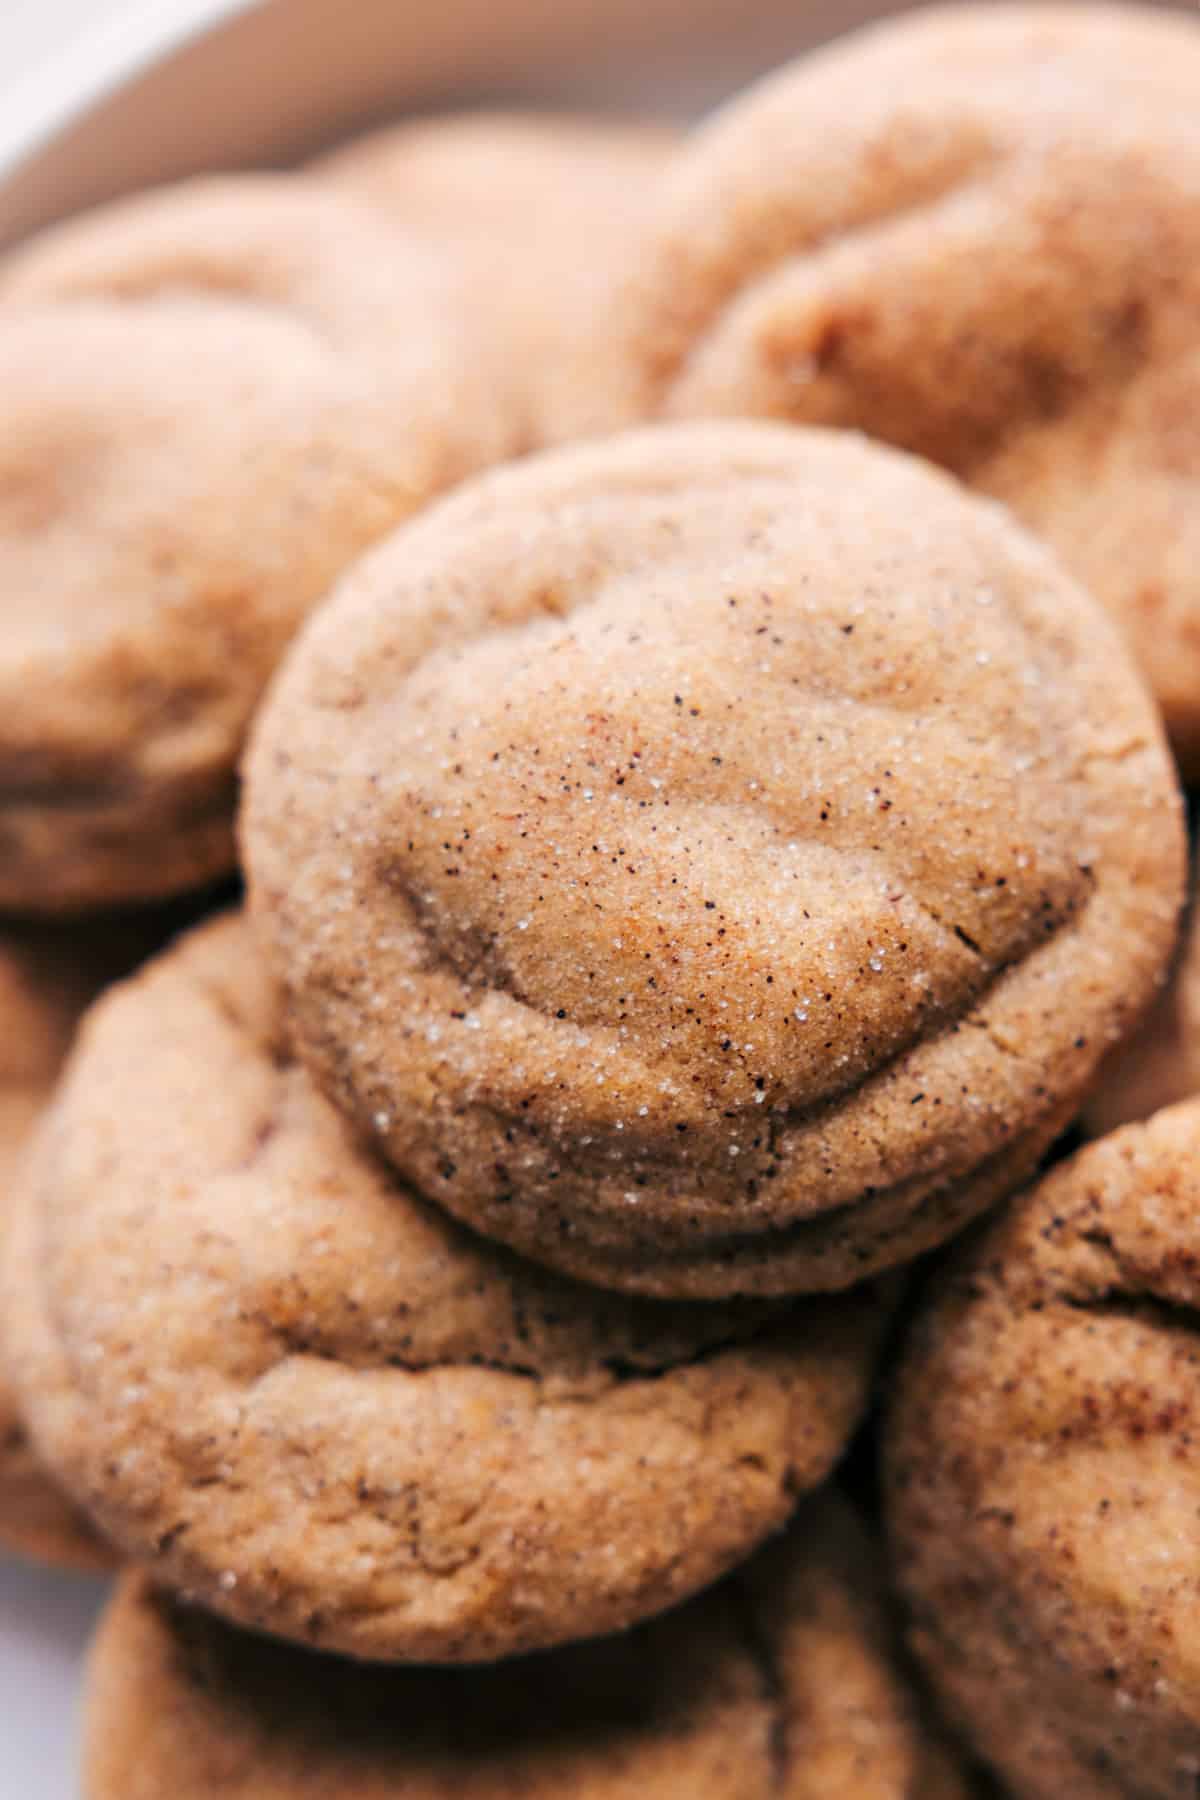 A plate filled with warm caramel snickerdoodles, inviting and ready to be savored.